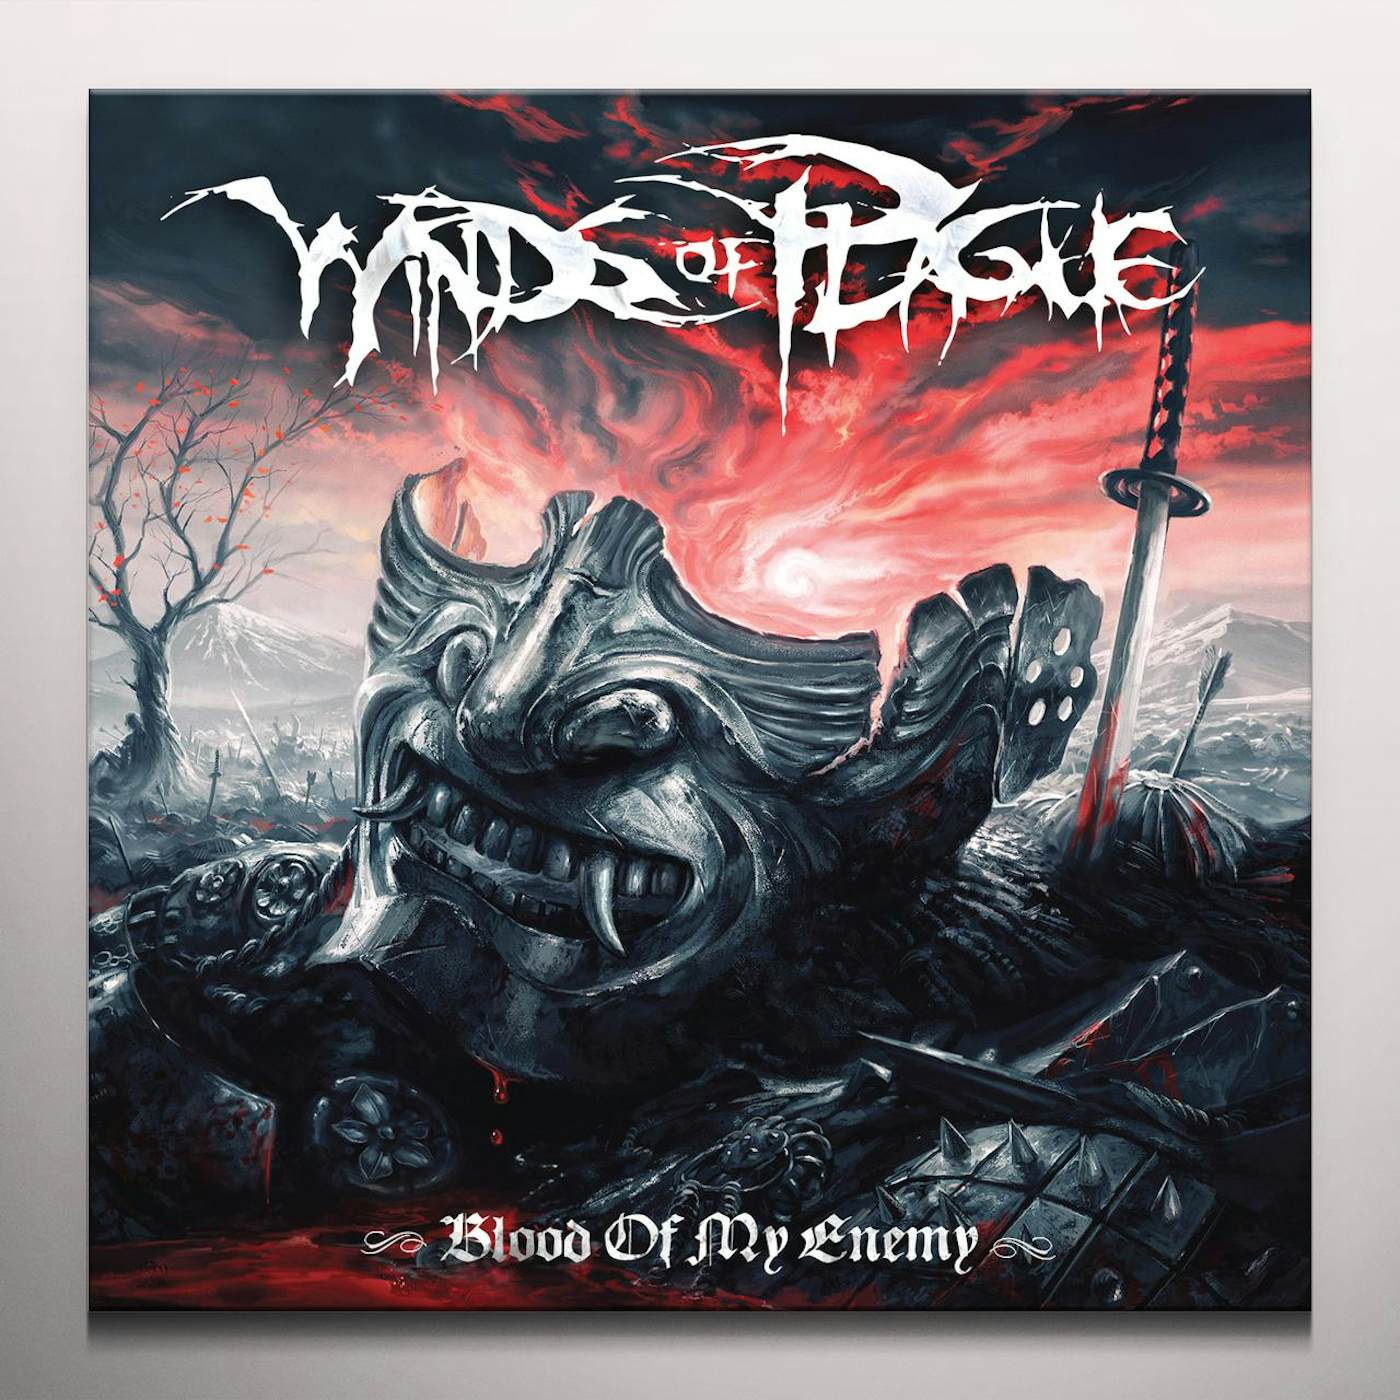 Winds of Plague Blood Of My Enemy Vinyl Record